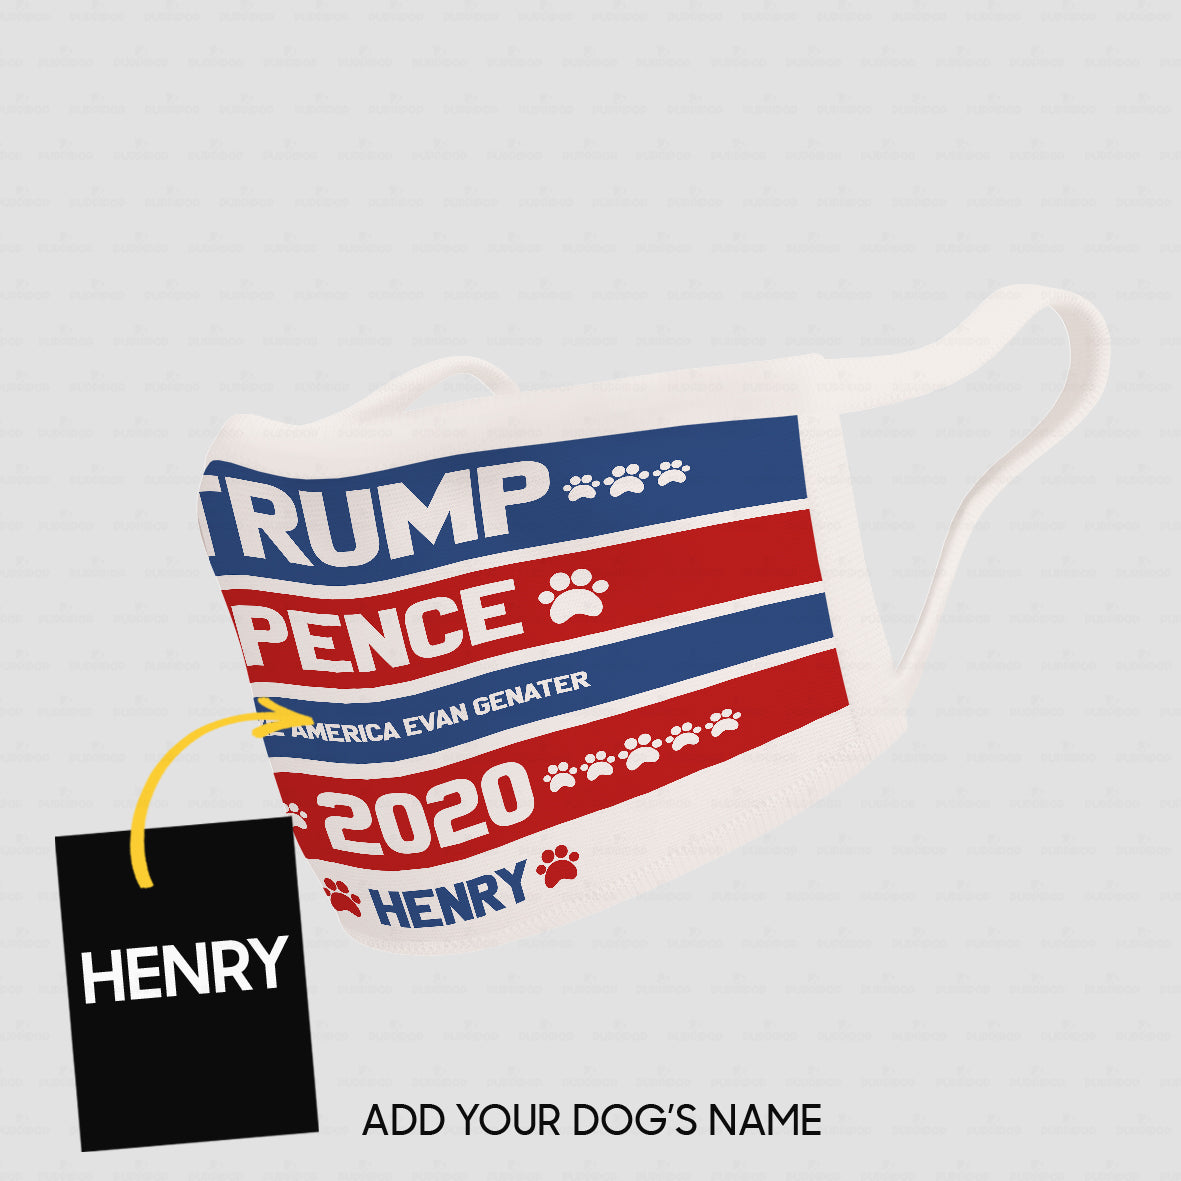 Personalized Dog Gift Idea - Trump Pence Make America Evan Genater 2020 For Dog Lovers - Cloth Mask